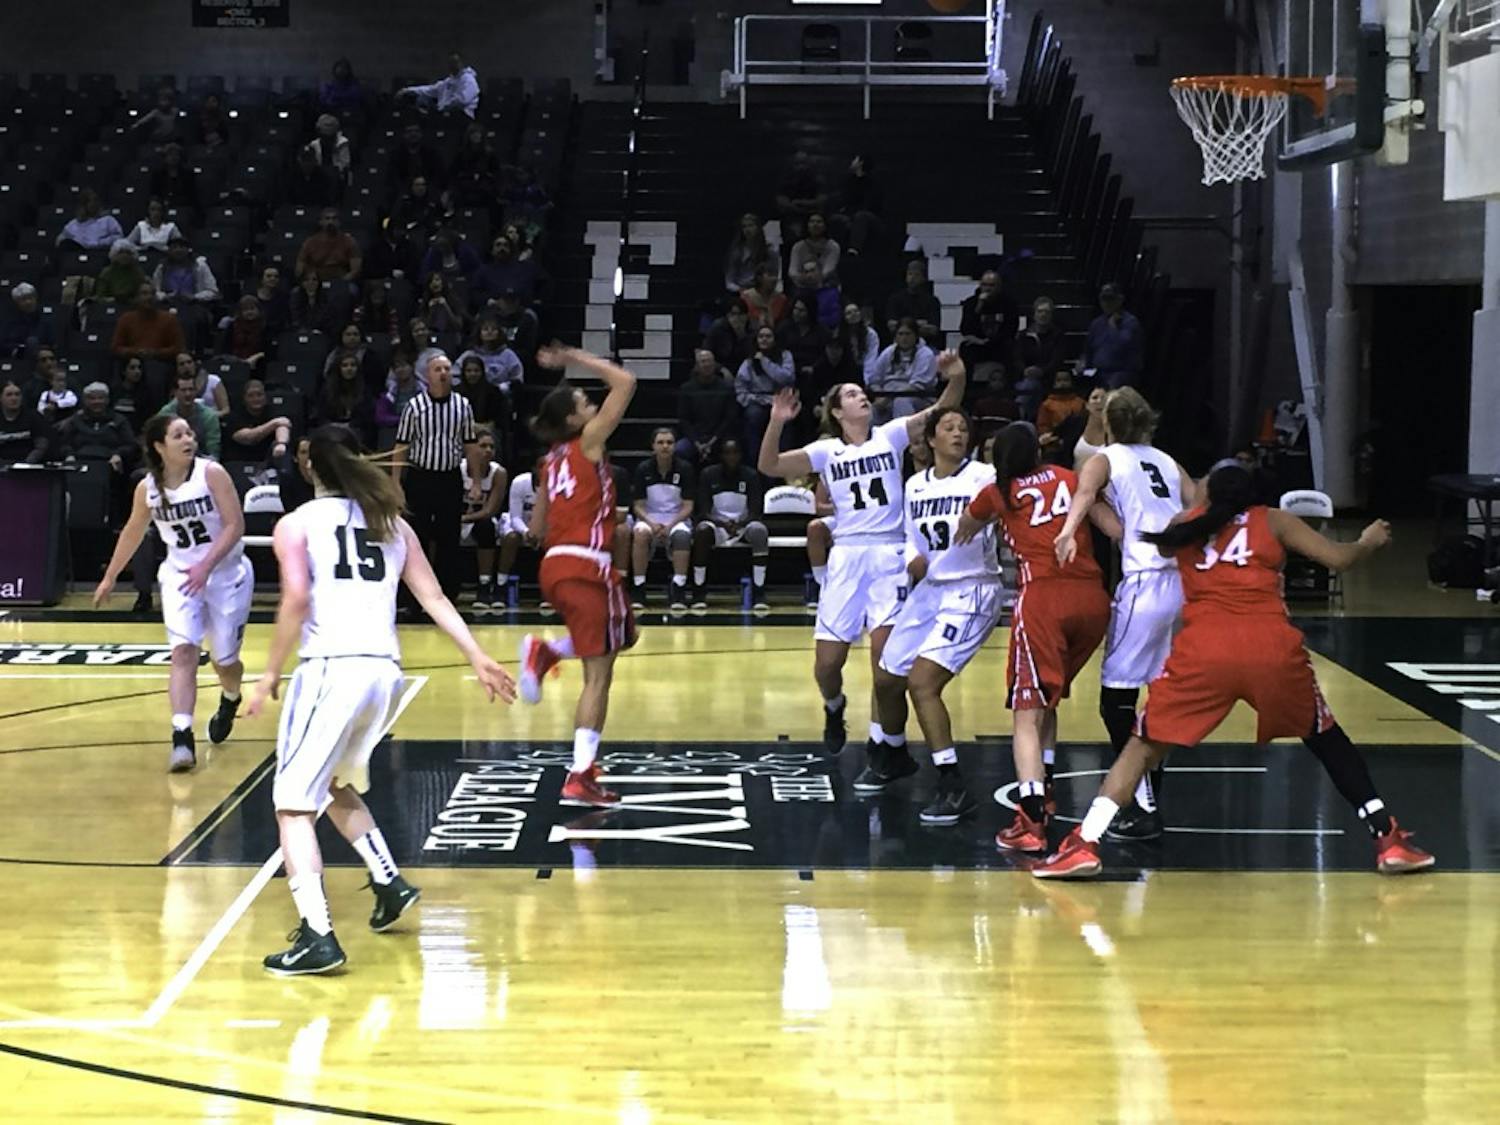 The women's basketball team opened its season with a 68-63 win over NJIT.